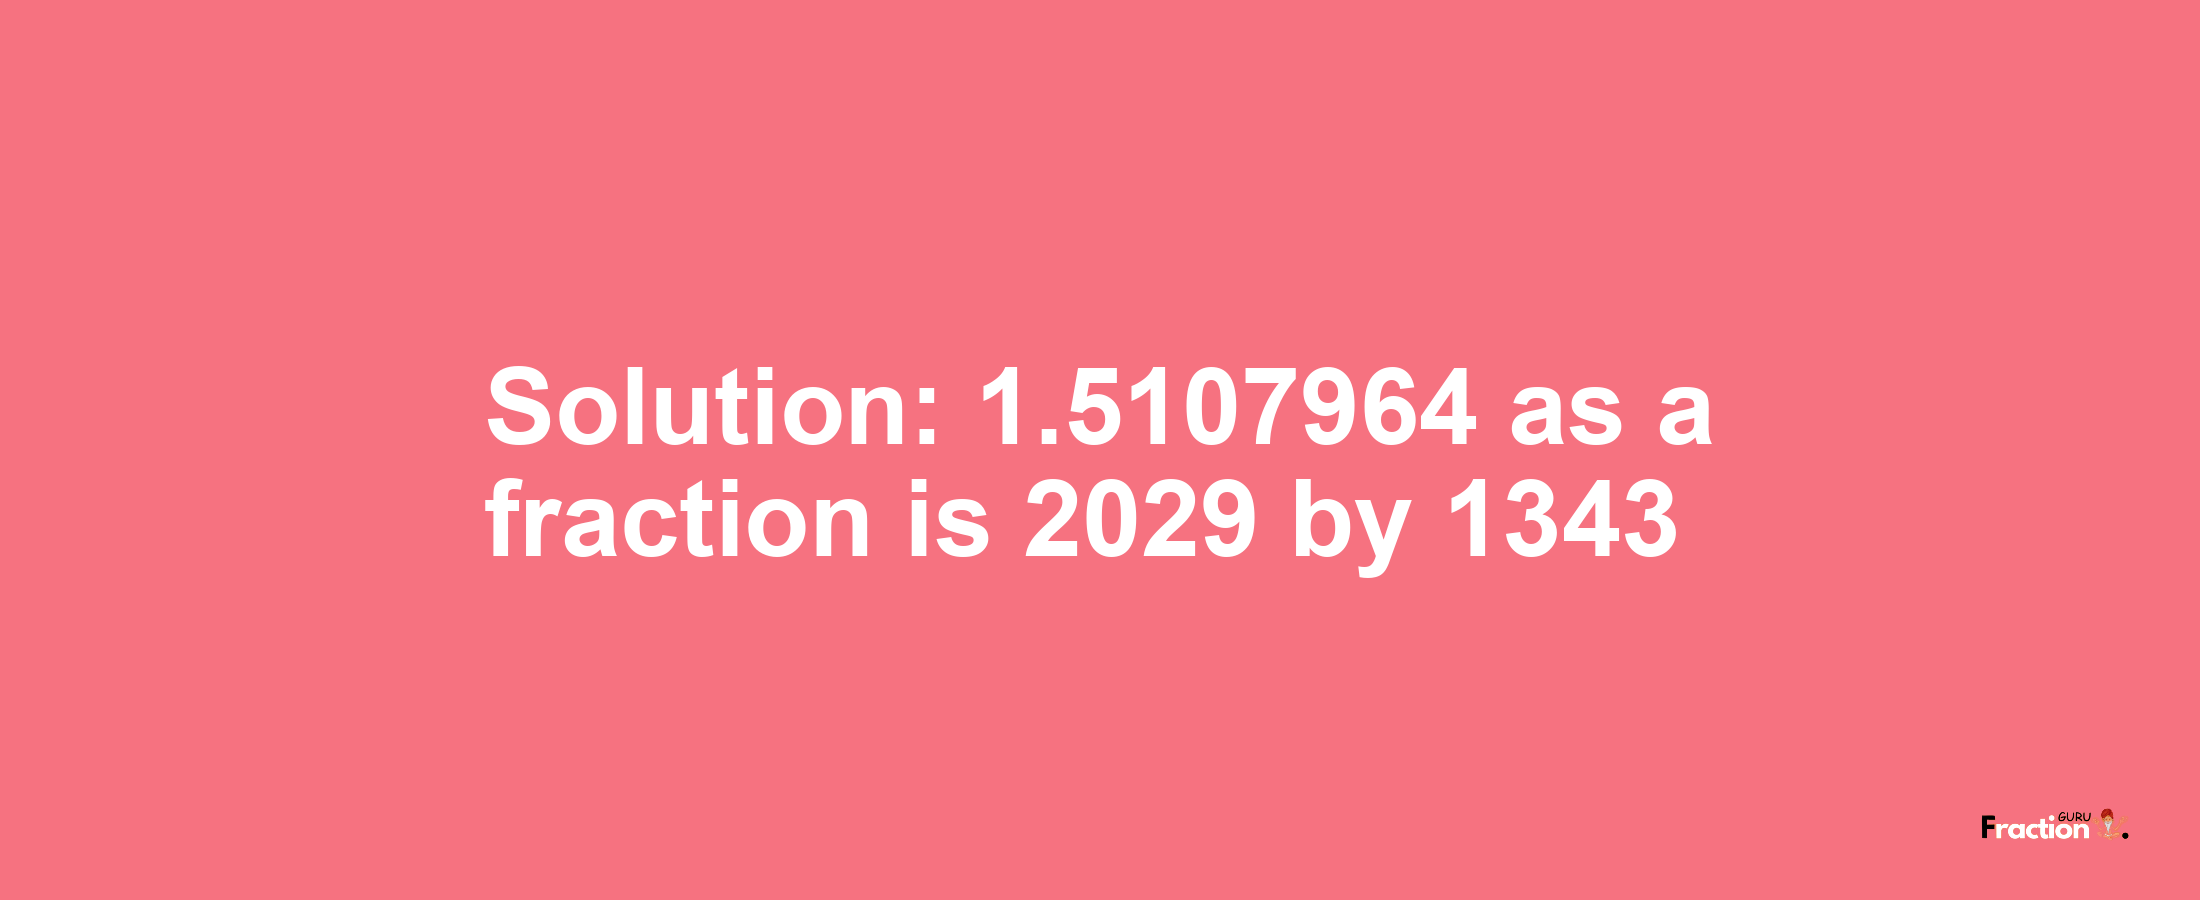 Solution:1.5107964 as a fraction is 2029/1343